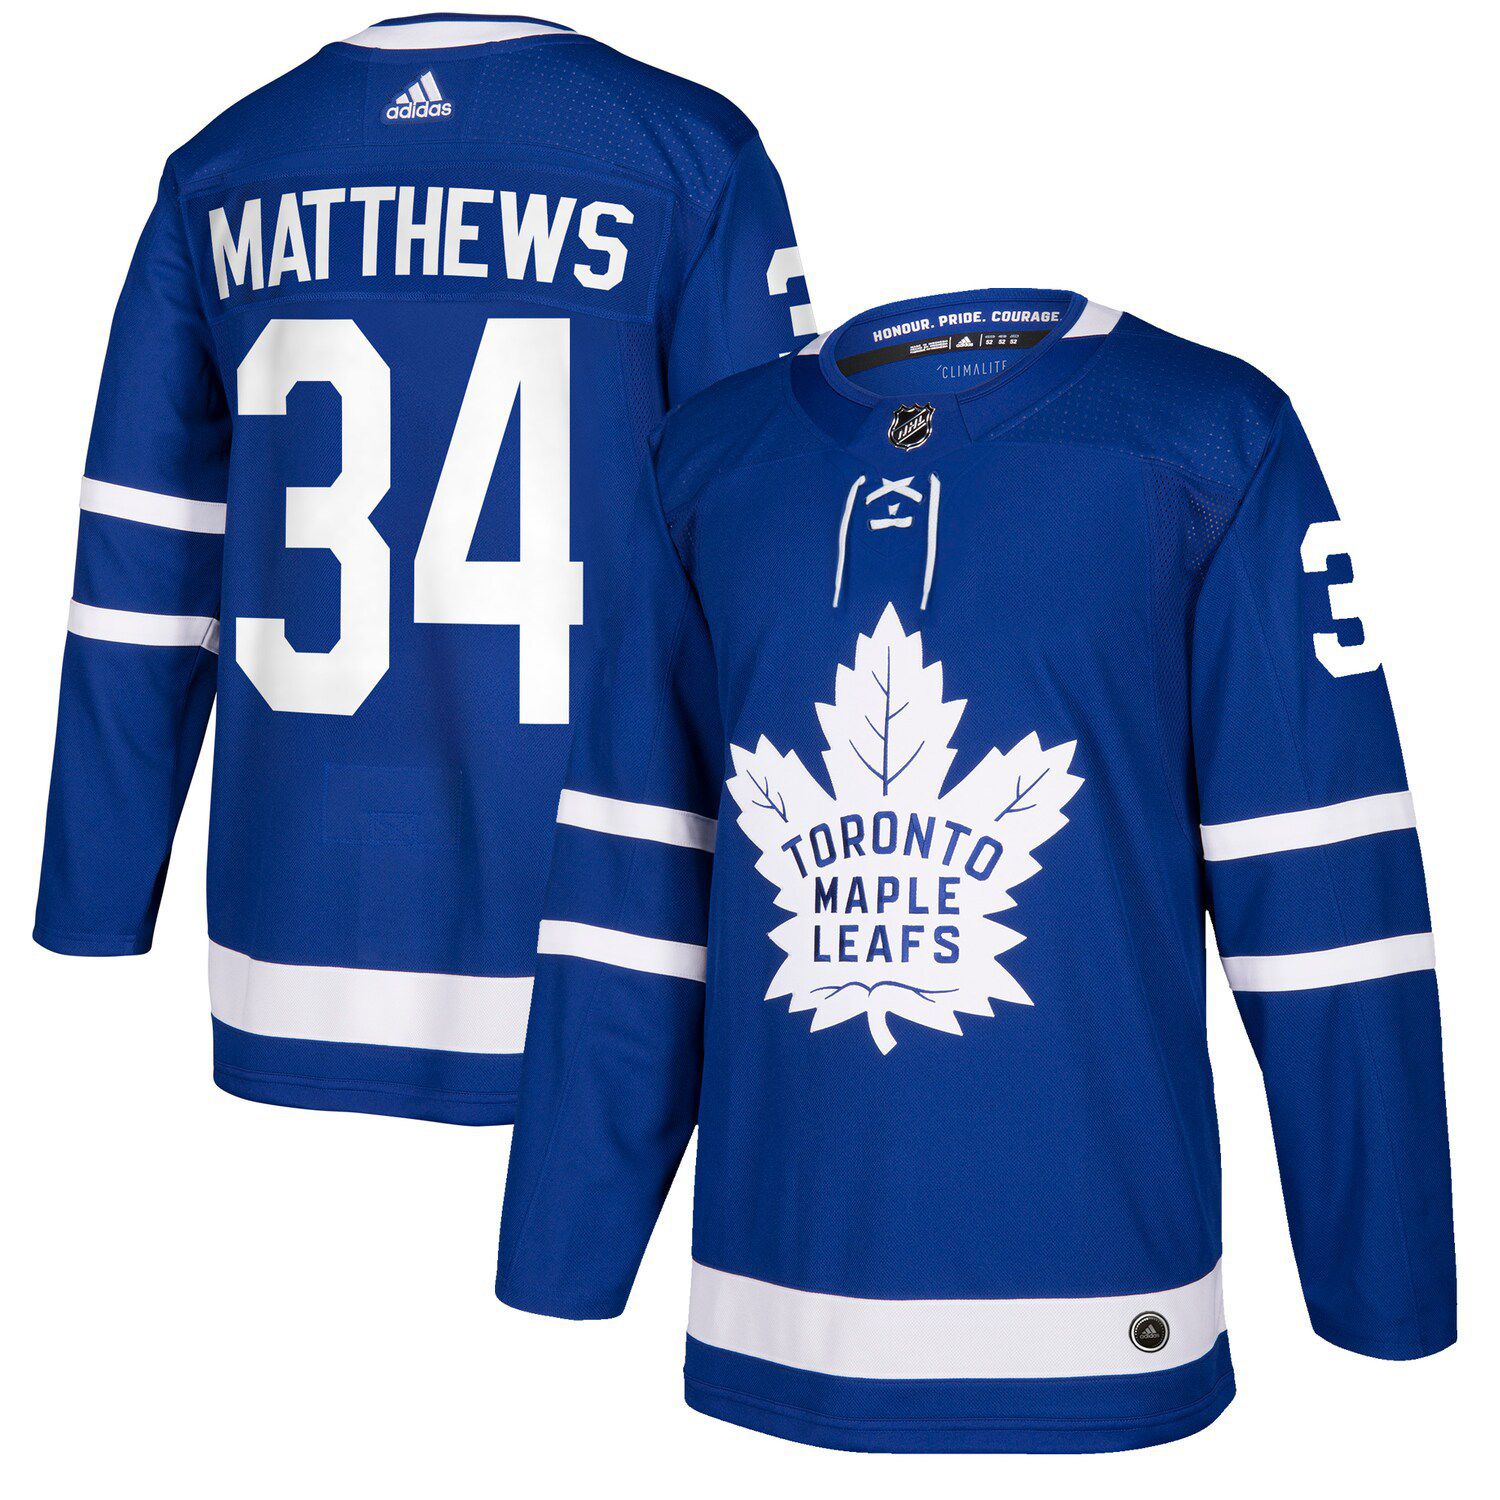 Toronto Maple Leafs Authentic Player Jersey